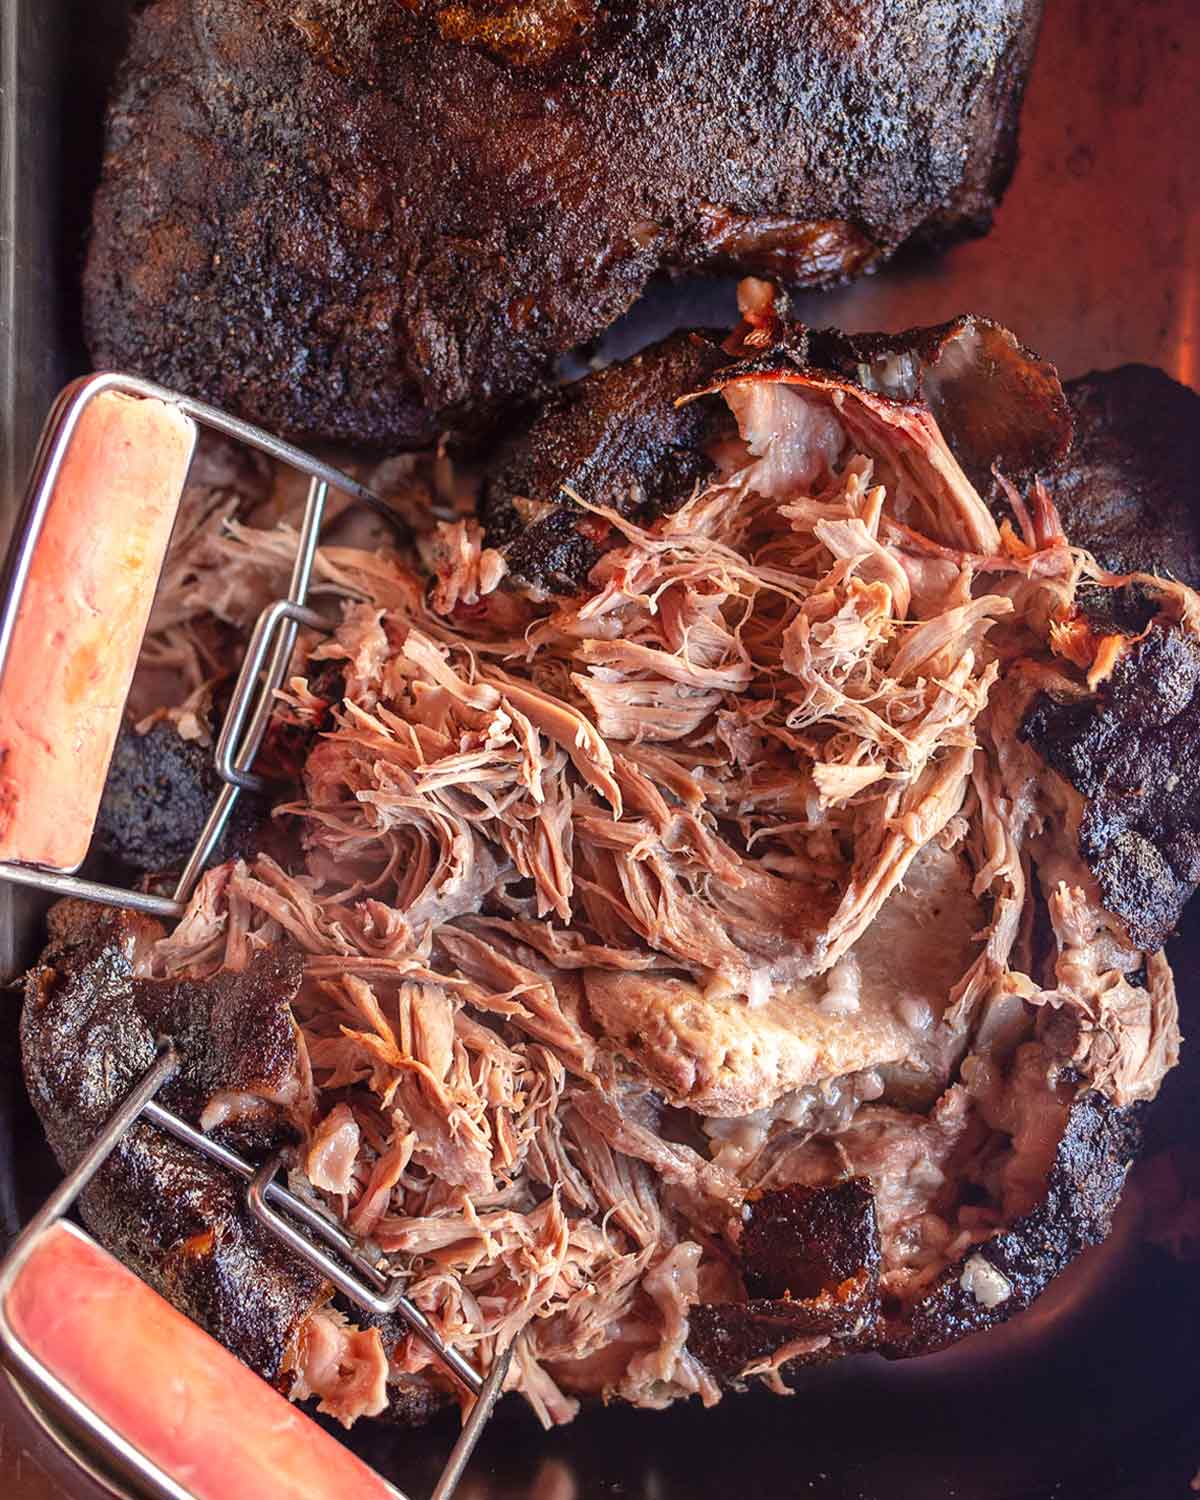 Cheap Cuts: Partially shredded slow cooker pulled pork with two large forks shredding it.